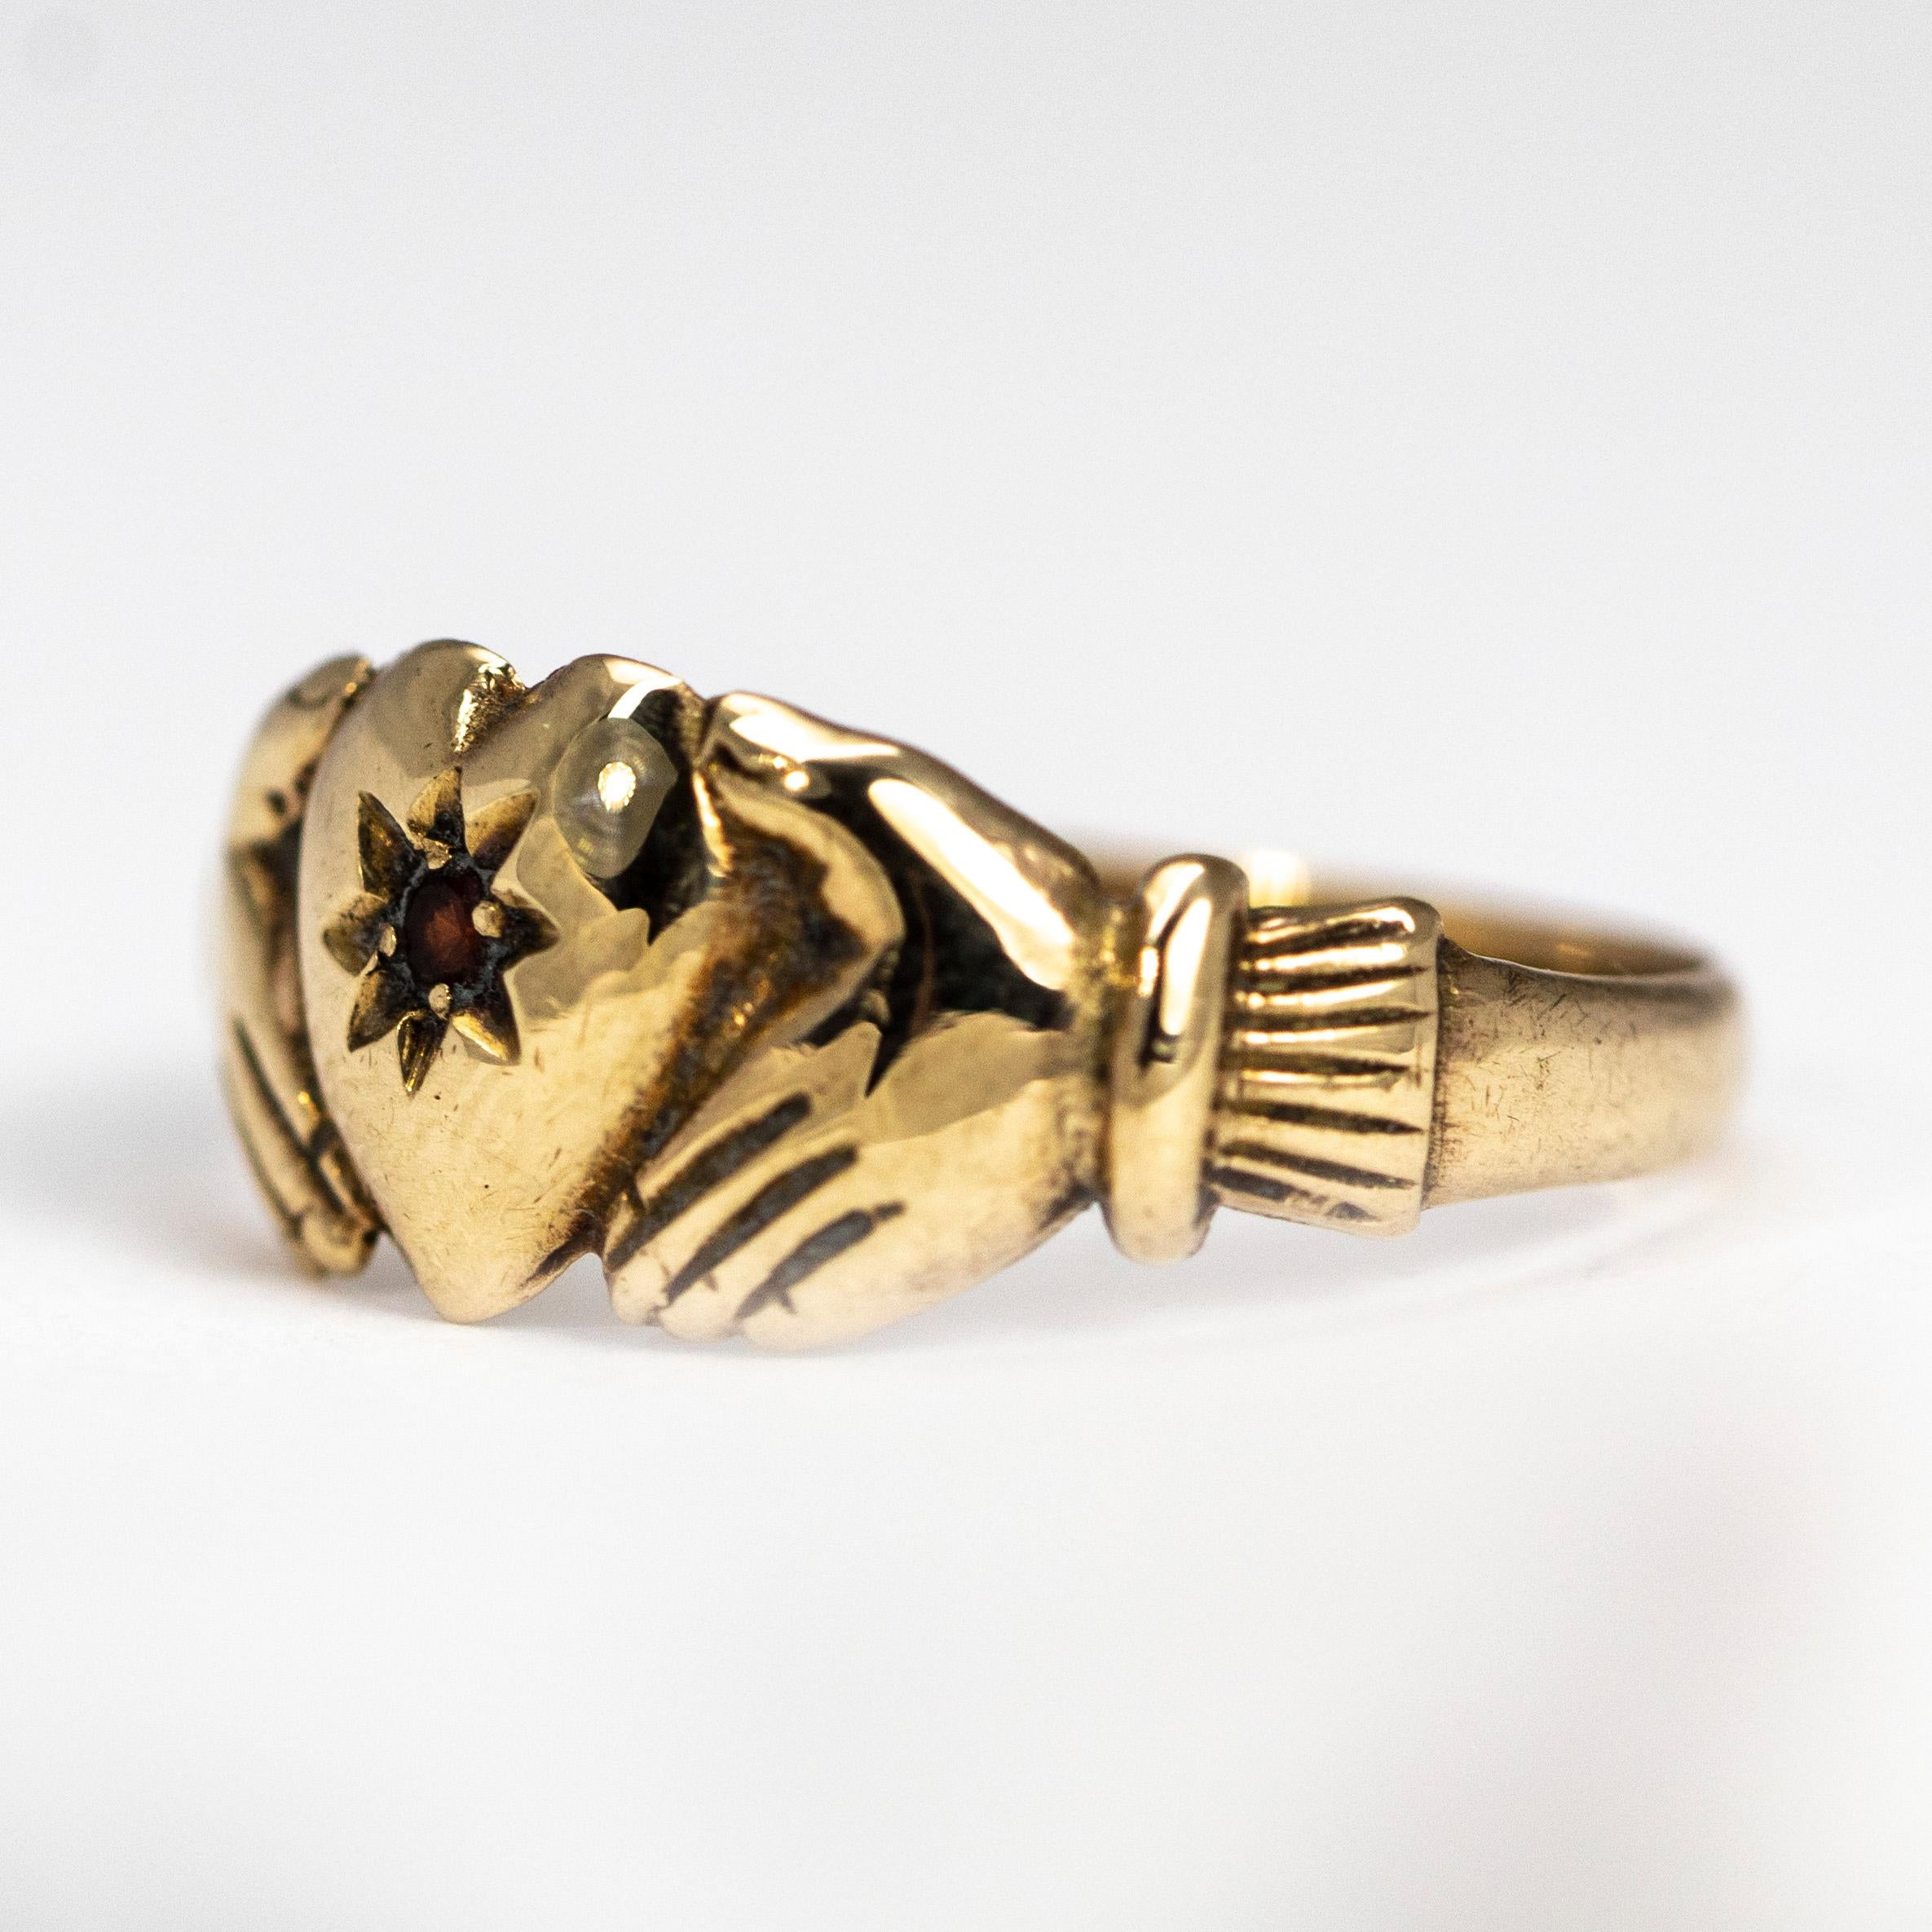 This ring is distinctive in that the bezel is cast to form two clasped hands that symbolise faith and trust. The heart at the centre holds a ruby and the ring is modelled in 9ct gold.

Ring Size: L 1/4 or 6
Widest Point: 7.5mm 

Weight: 1.74g